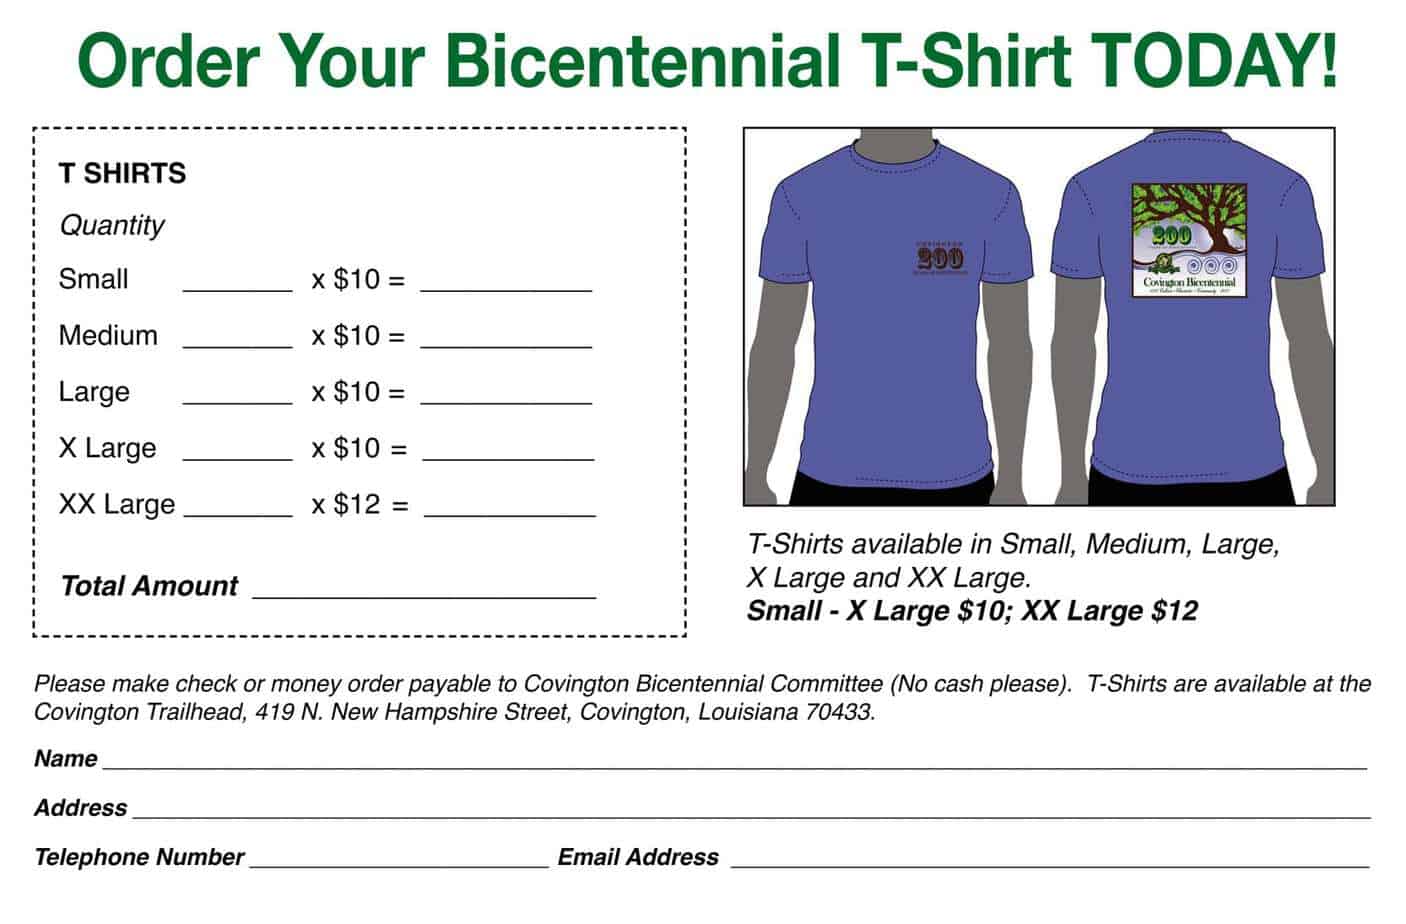 tshirt-order-forms-word-excel-fomats